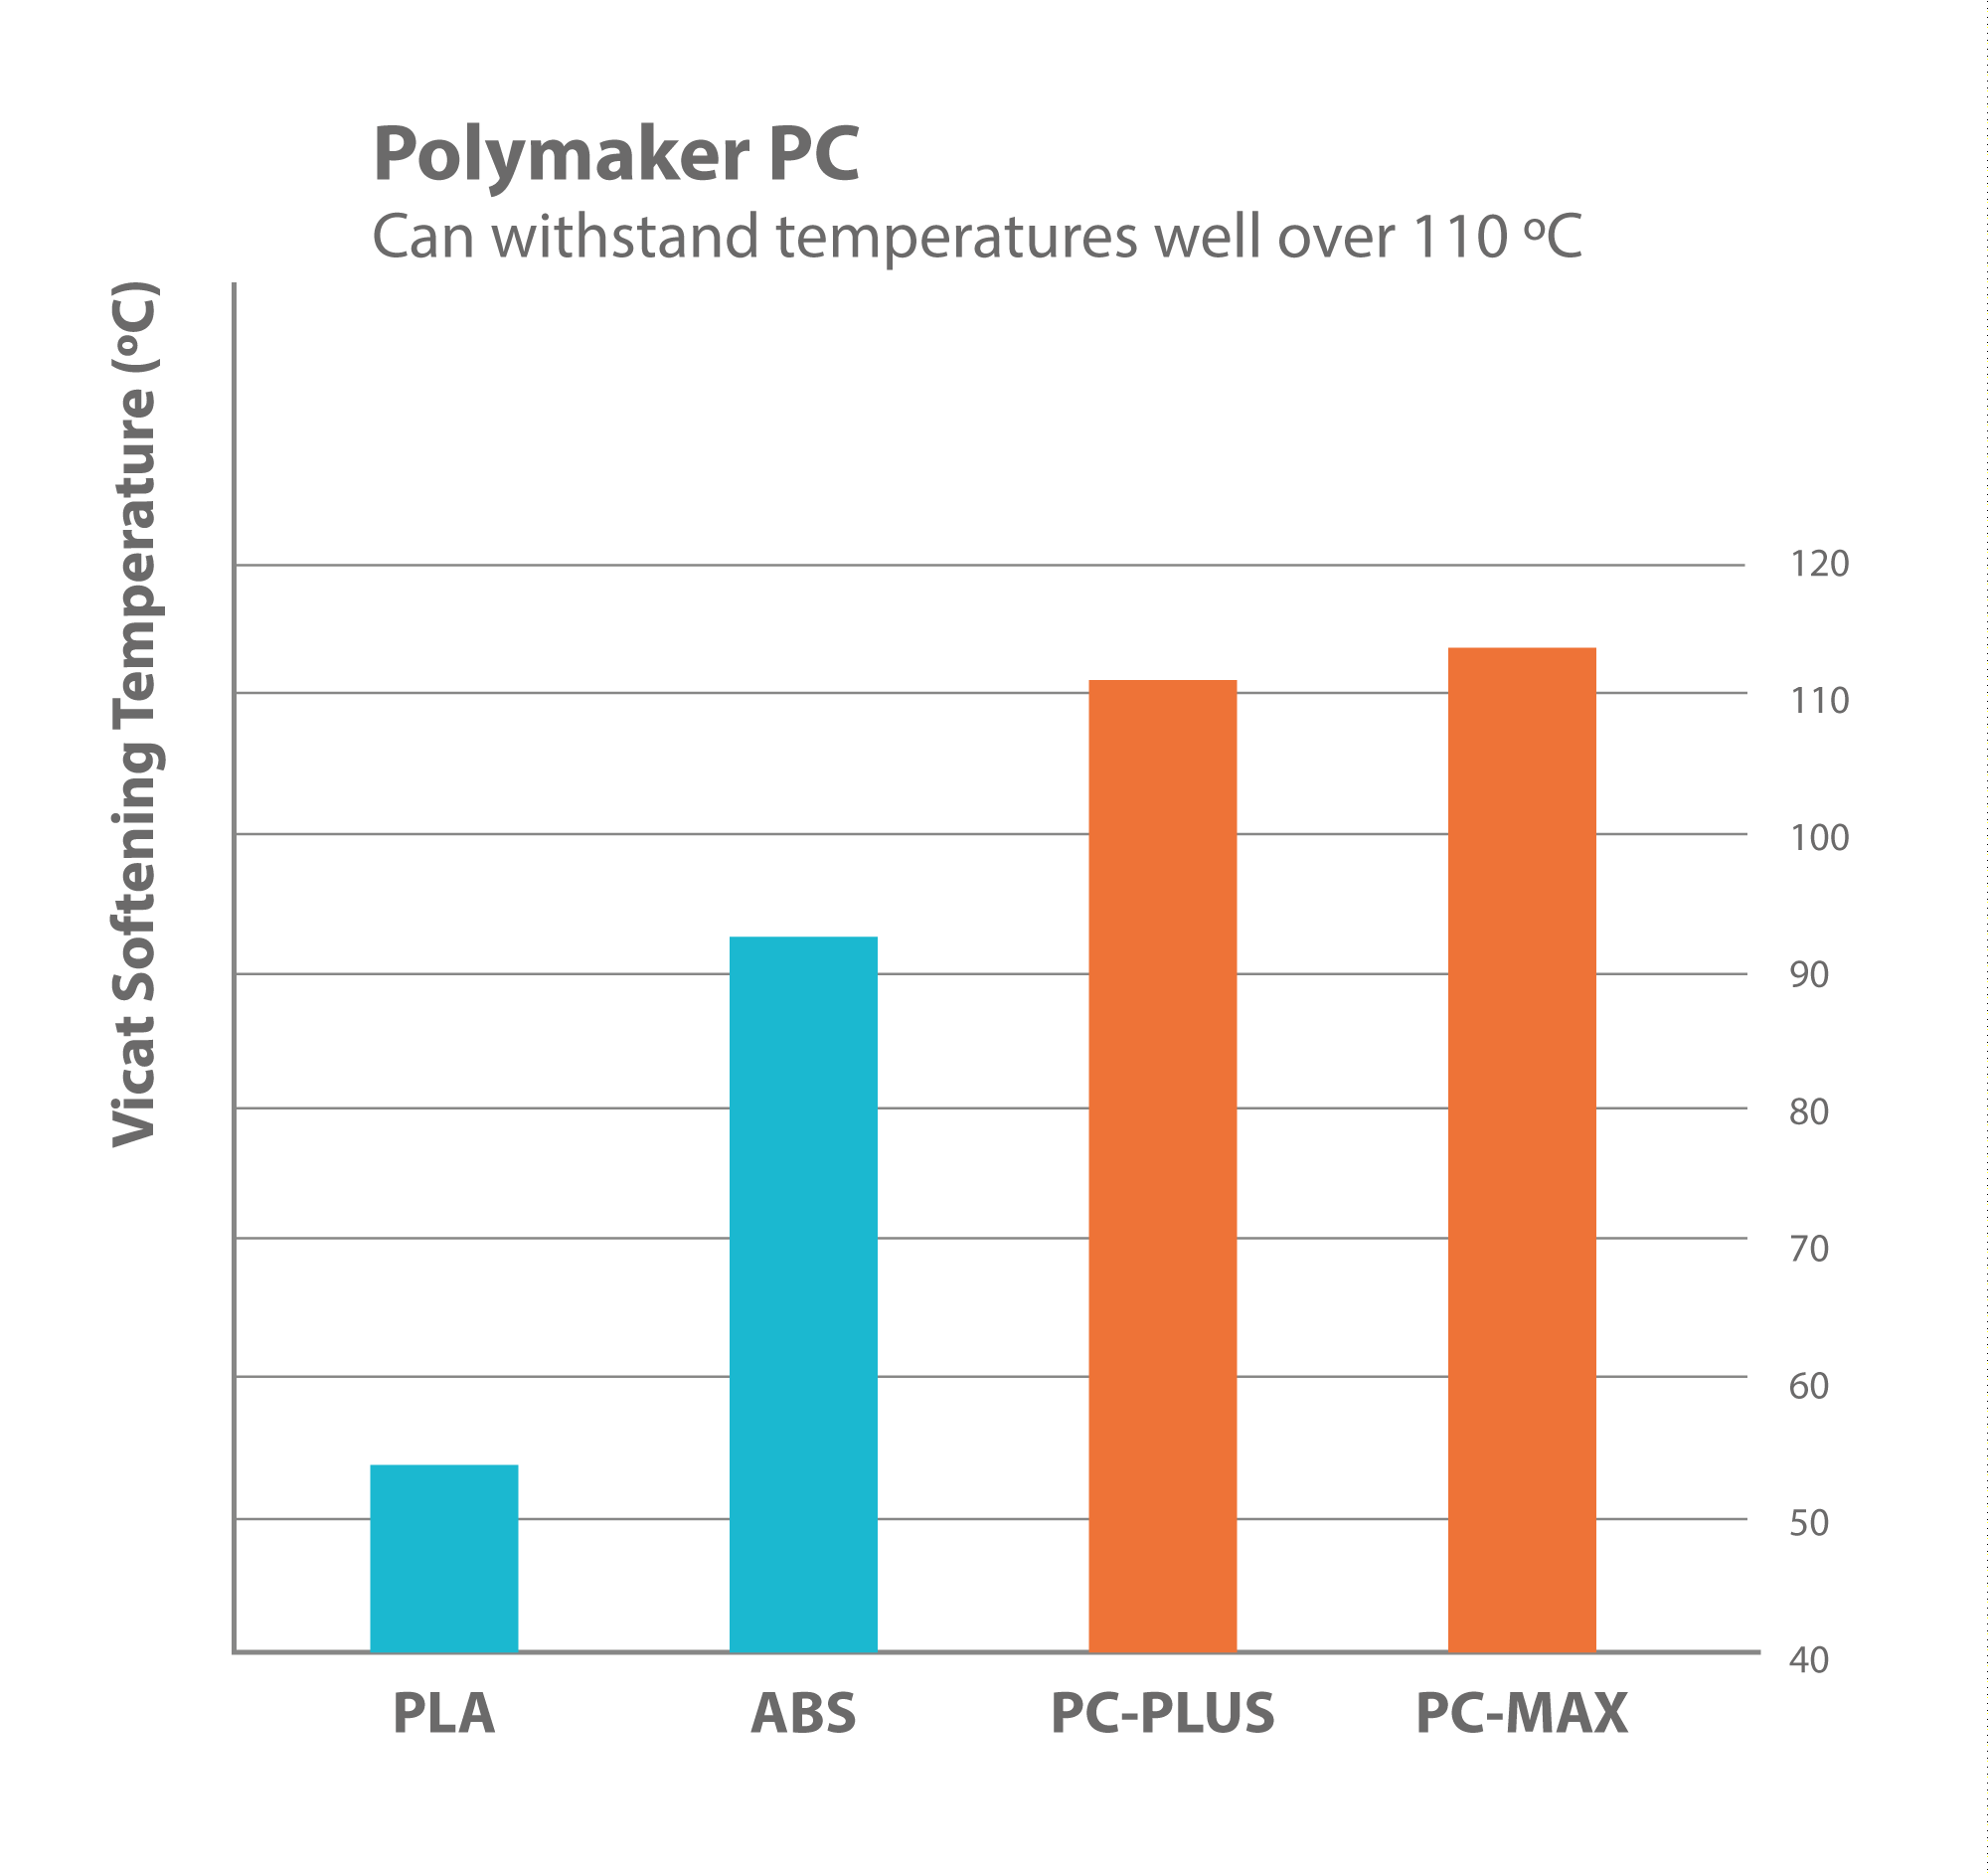 Polymaker PolyMax PC (Polycarbonate) | HartSmart Products